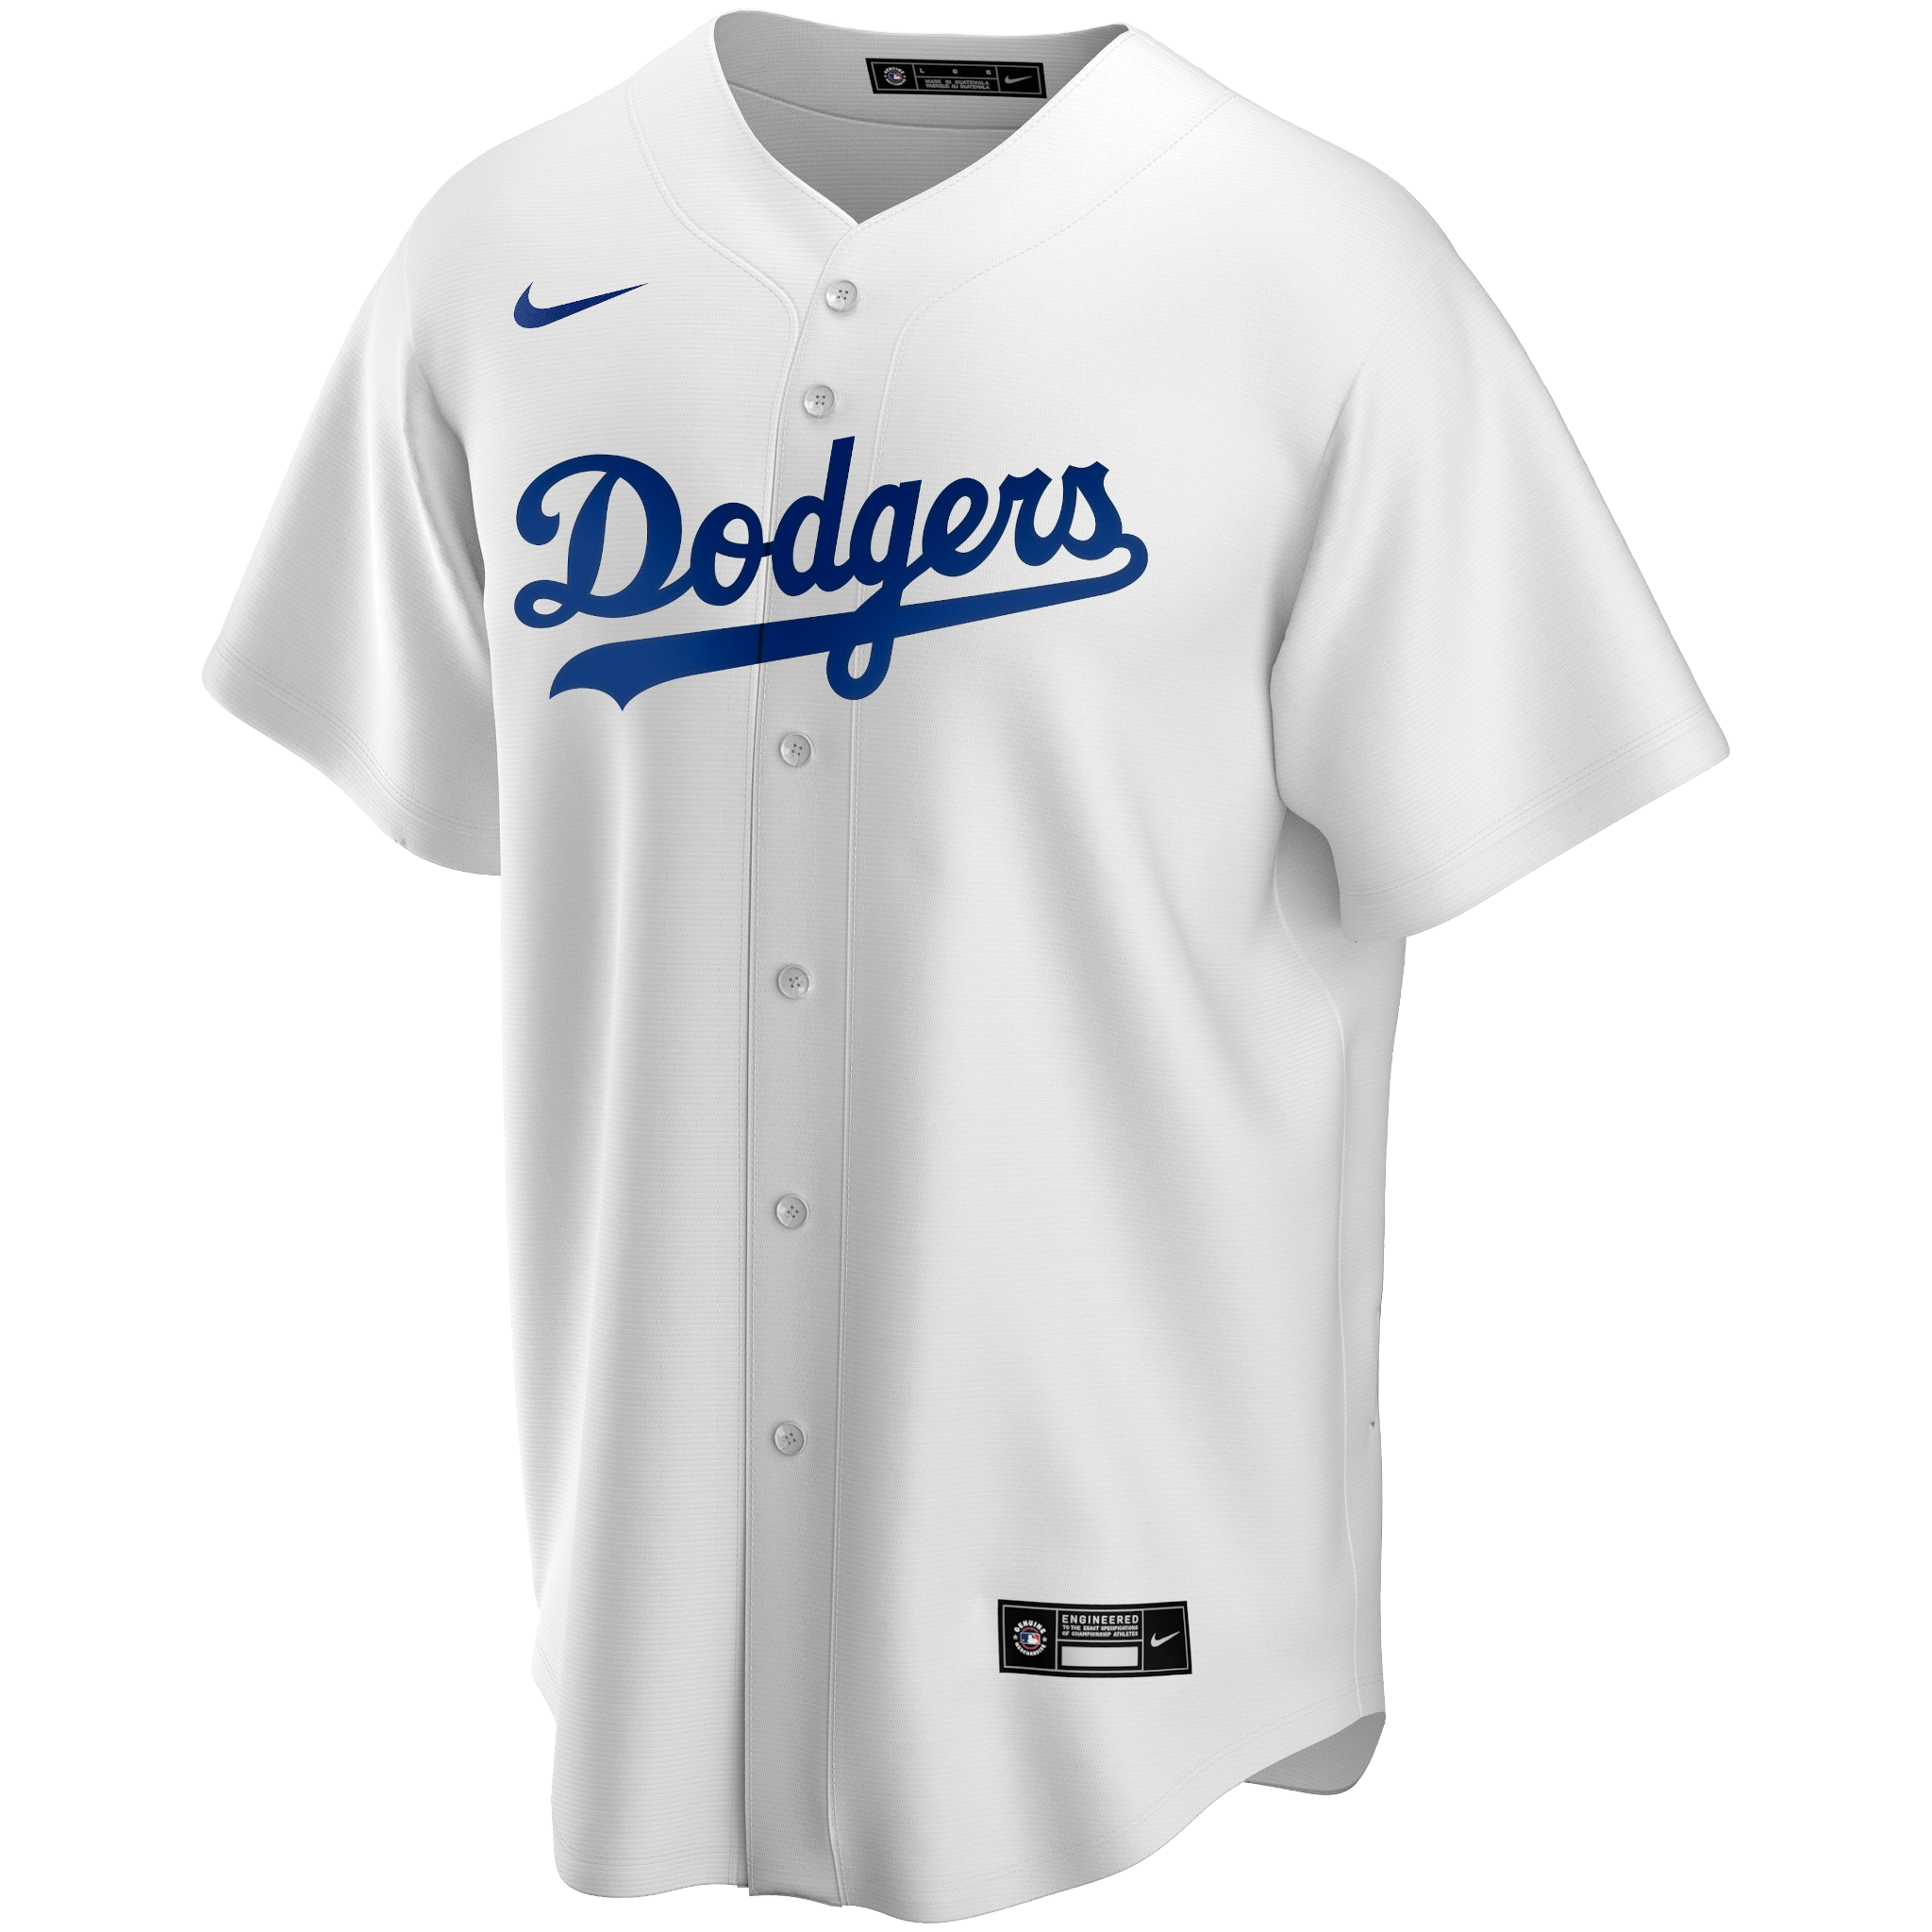 Max Muncy Jersey, #13 Muncy Jersey, Los Angeles Dodgers Jersey For